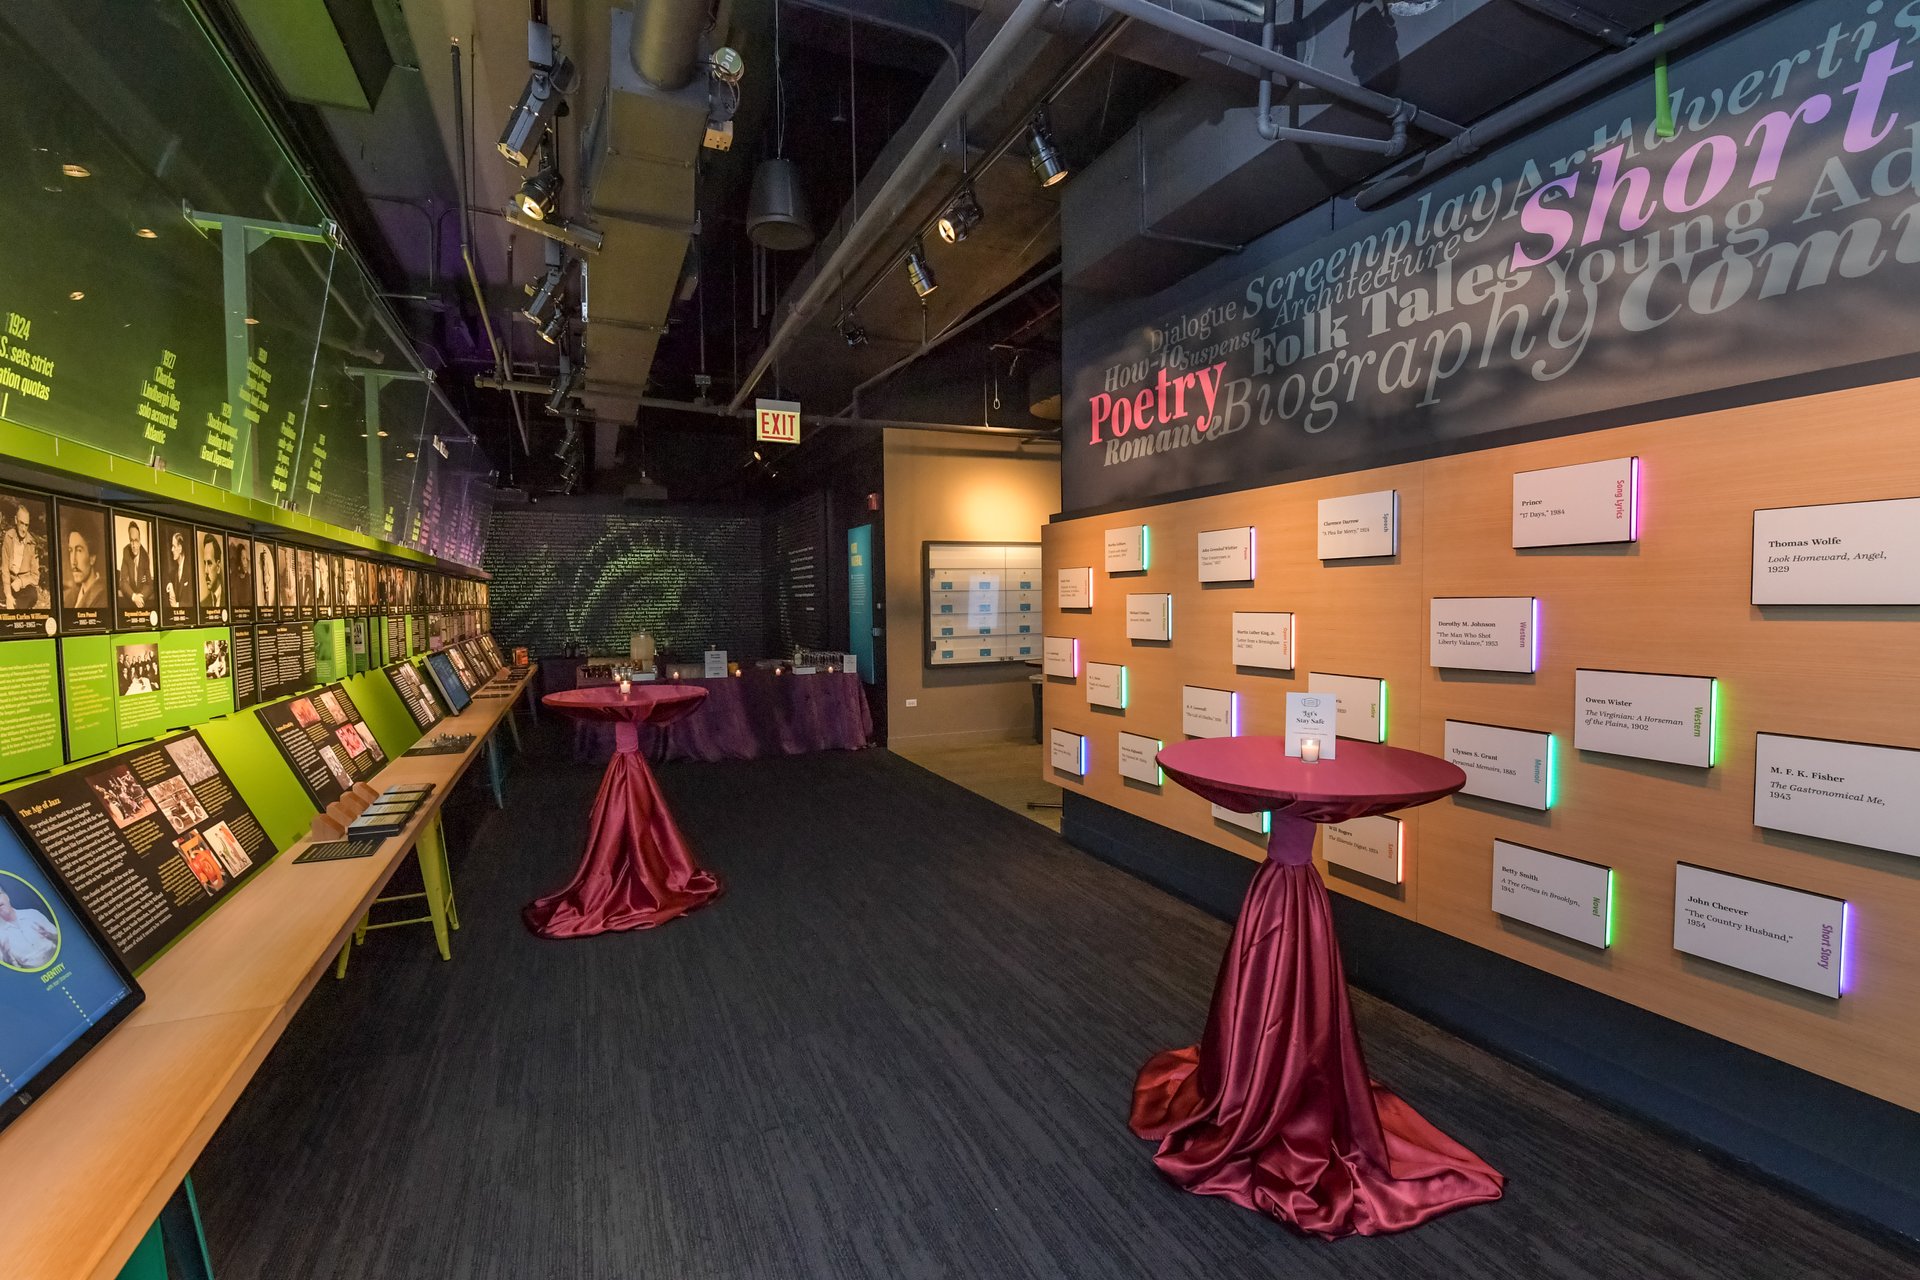 A cocktail event at the American Writers Museum in which 2 tables are set up in the Nation of Writers gallery